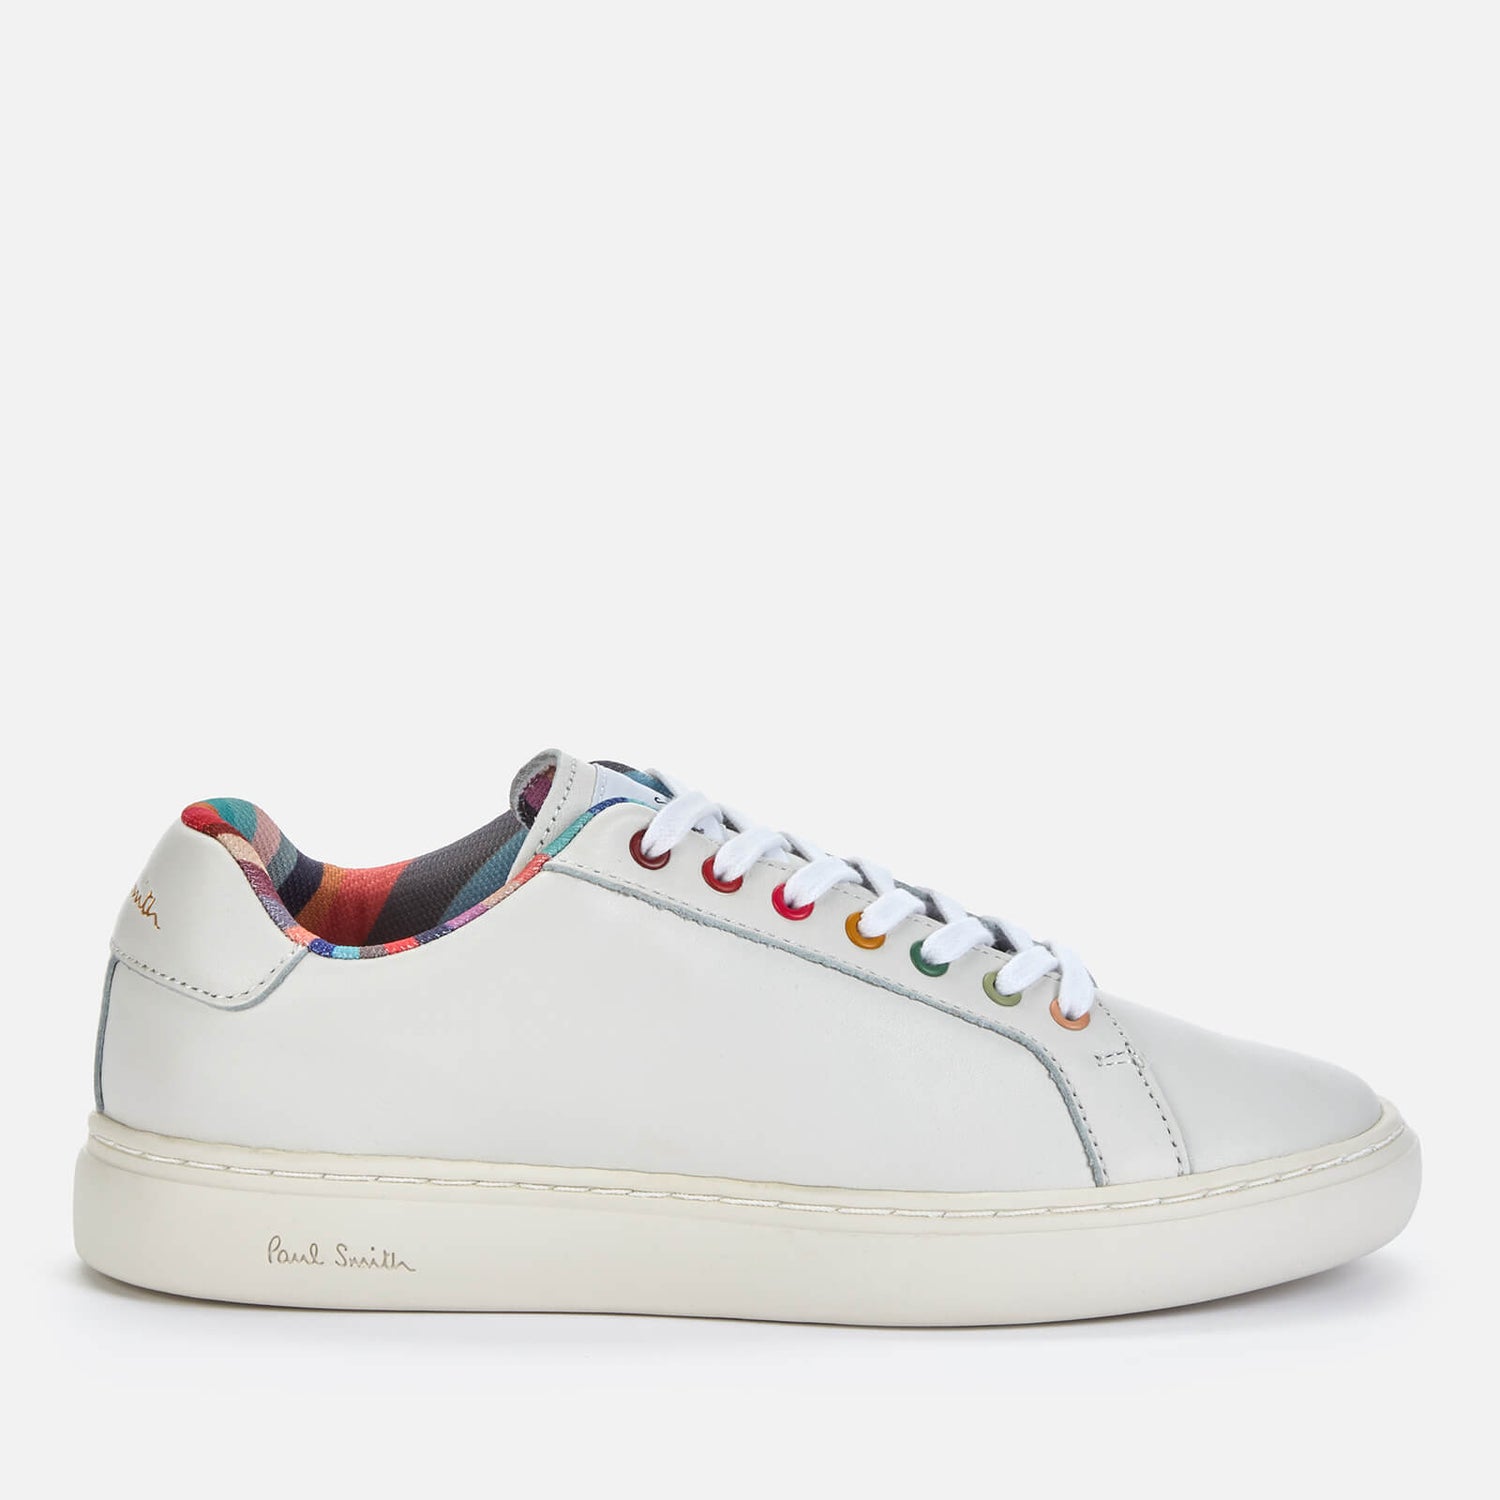 Paul Smith Women's Lapin Leather Low Top Trainers - White - Free UK ...